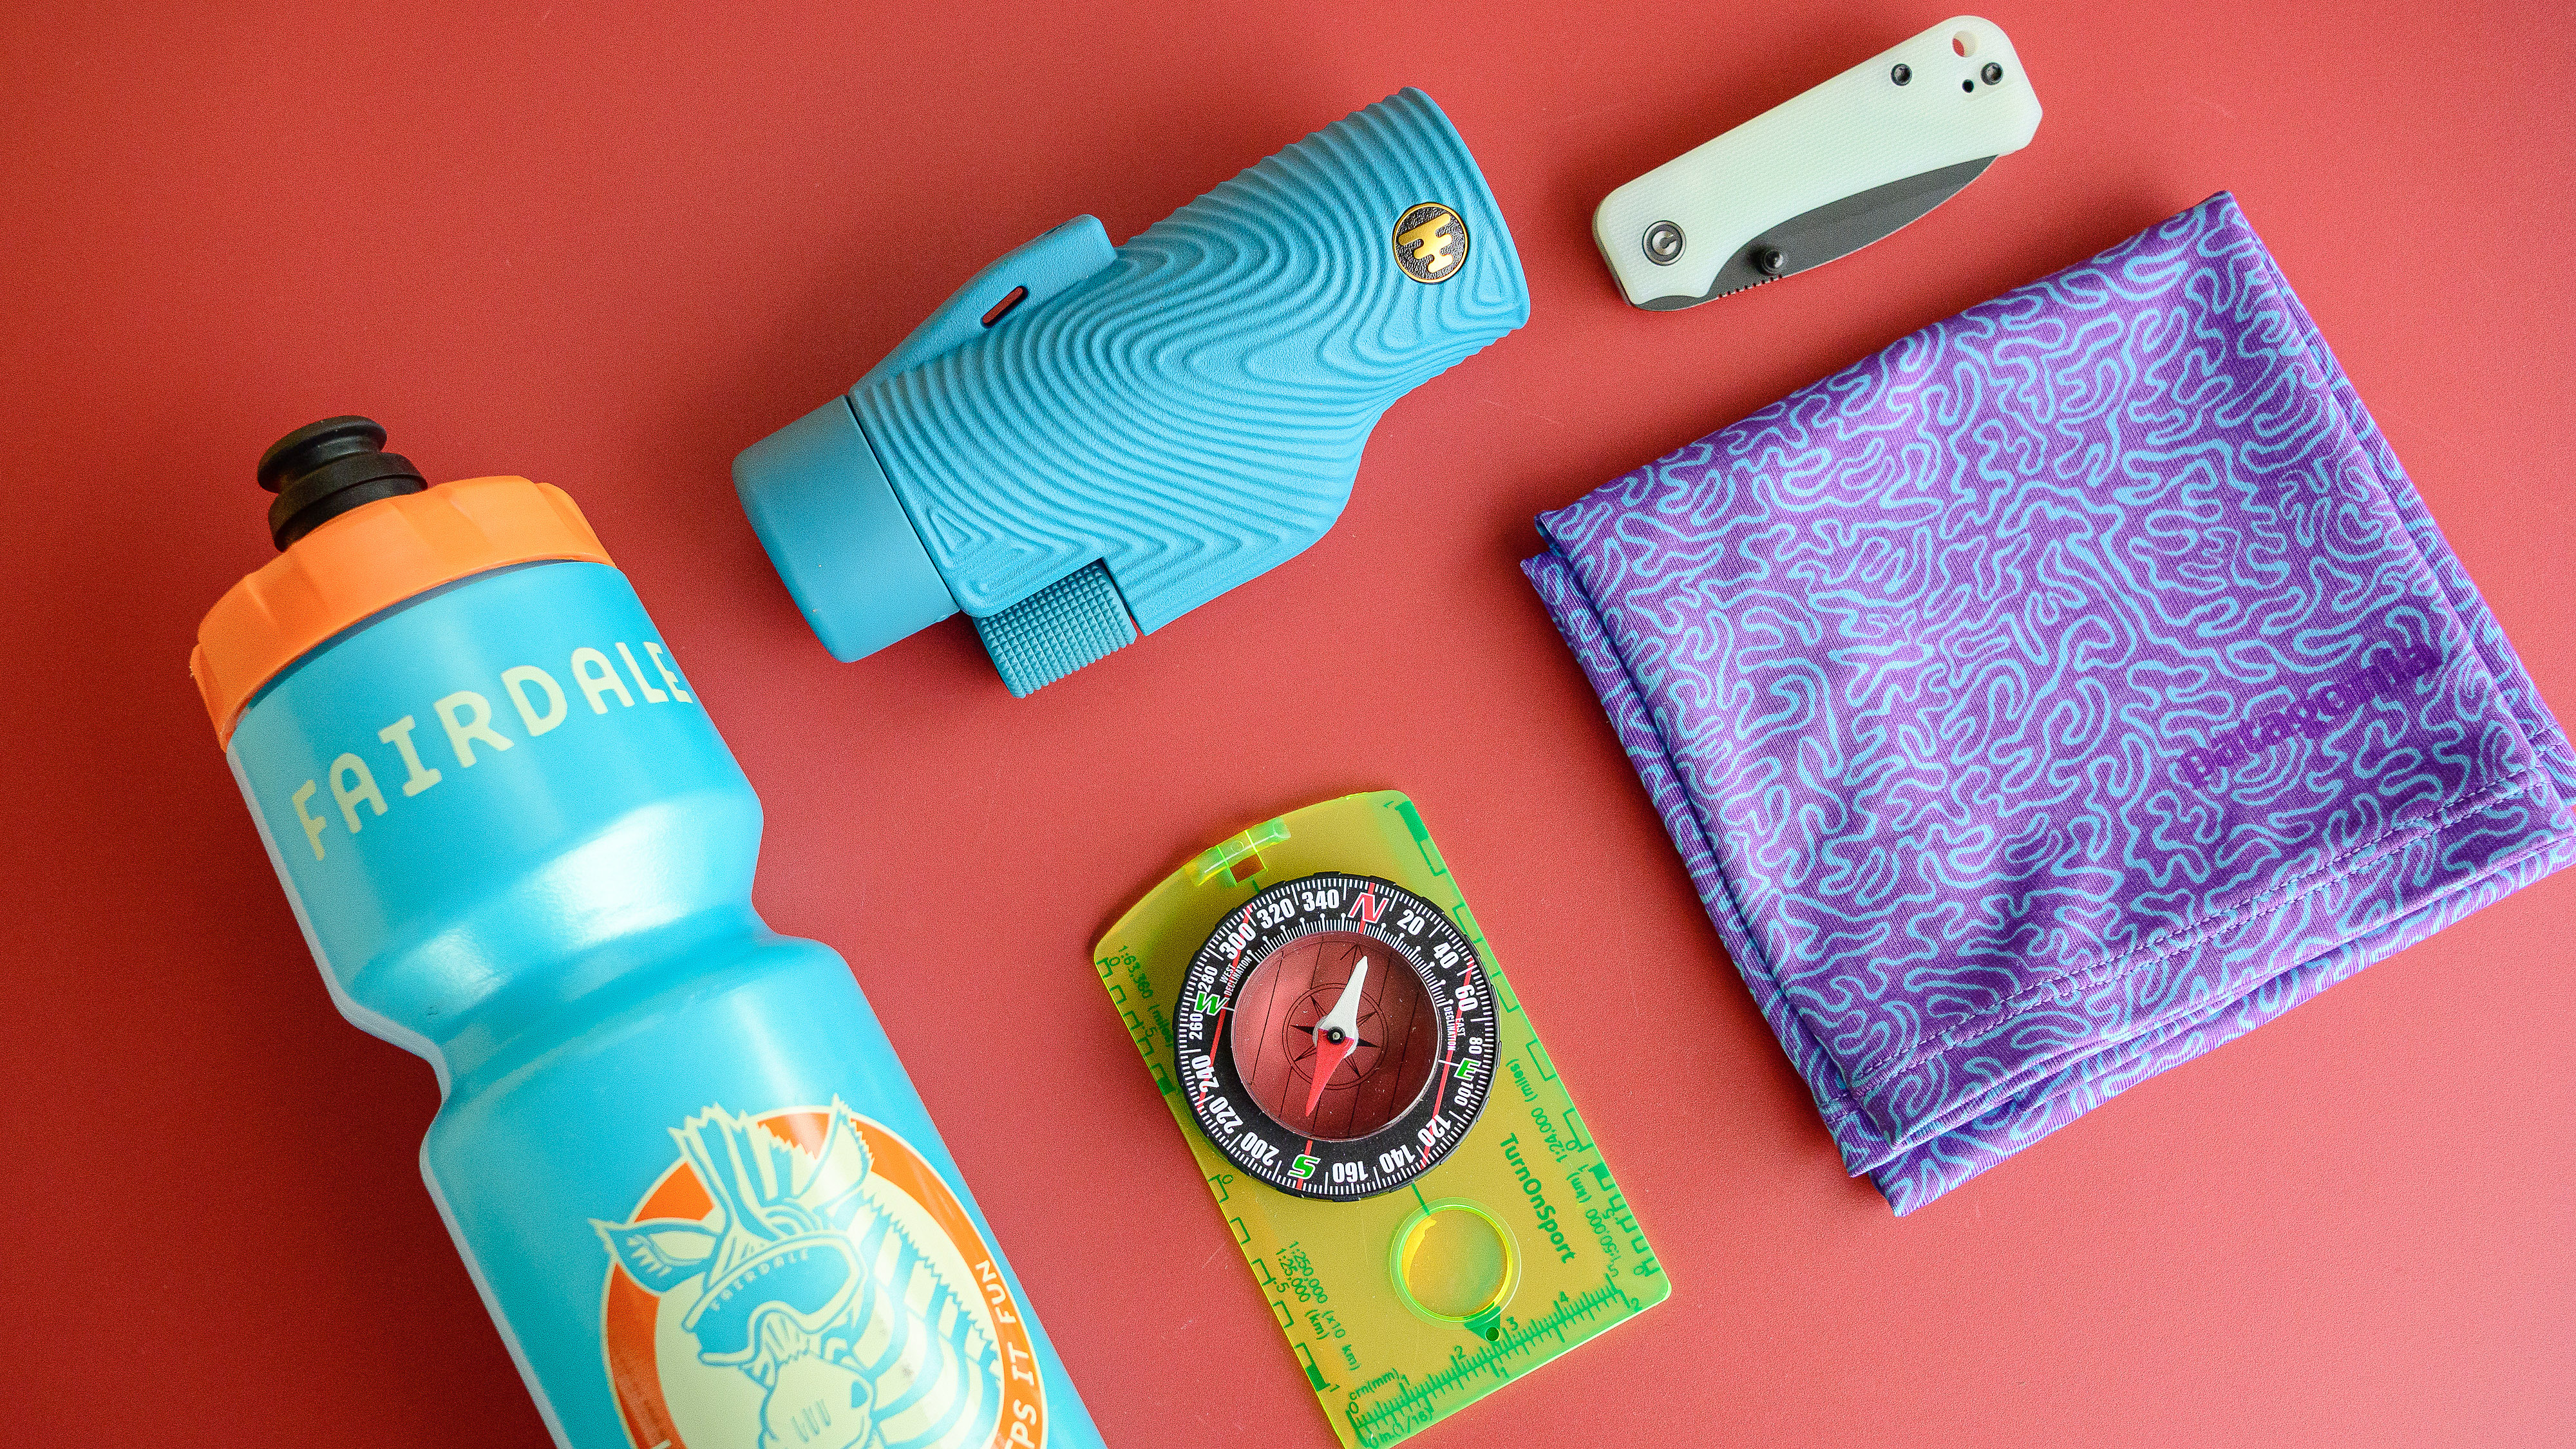 5 affordable items to bring on your next hike, including a bike water bottle, compass, neck gaiter, rugged telescope and everyday carry knife.